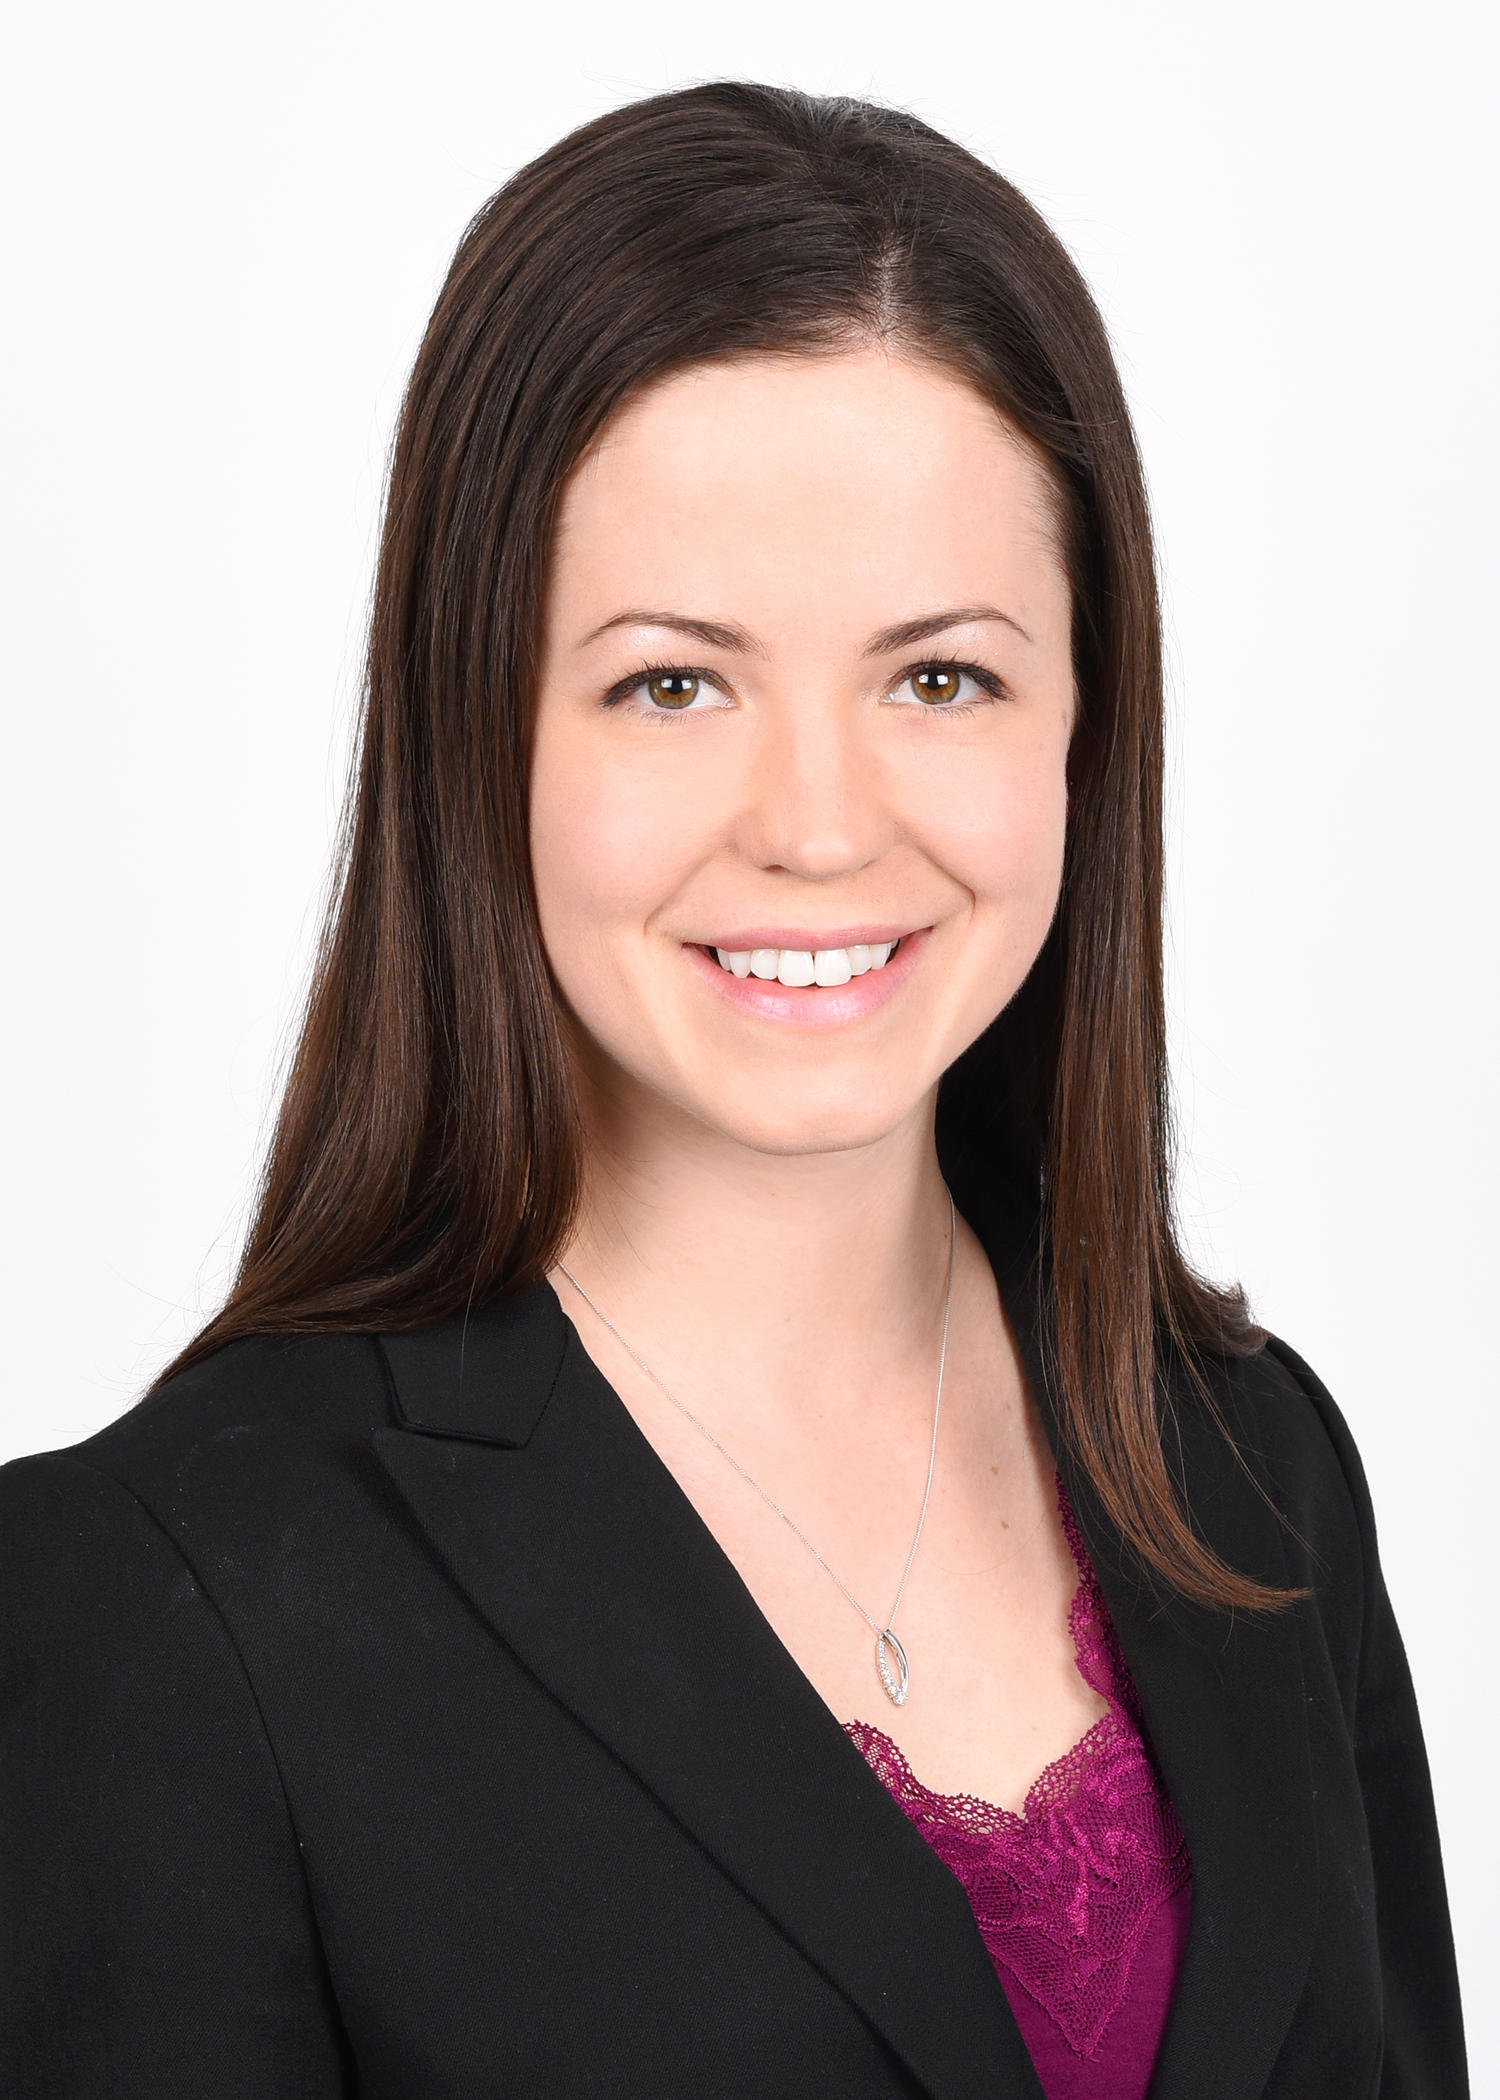 Noumia Cloutier-Gill, O.D., FAAO, is an optometrist at Minnesota Eye Consultants. Dr. Gill specializes in primary eye care and specialty contact lenses. Dr. Gill grew up in Montreal, Quebec and received her Doctor of Optometry from the University of Montreal School of Optometry.